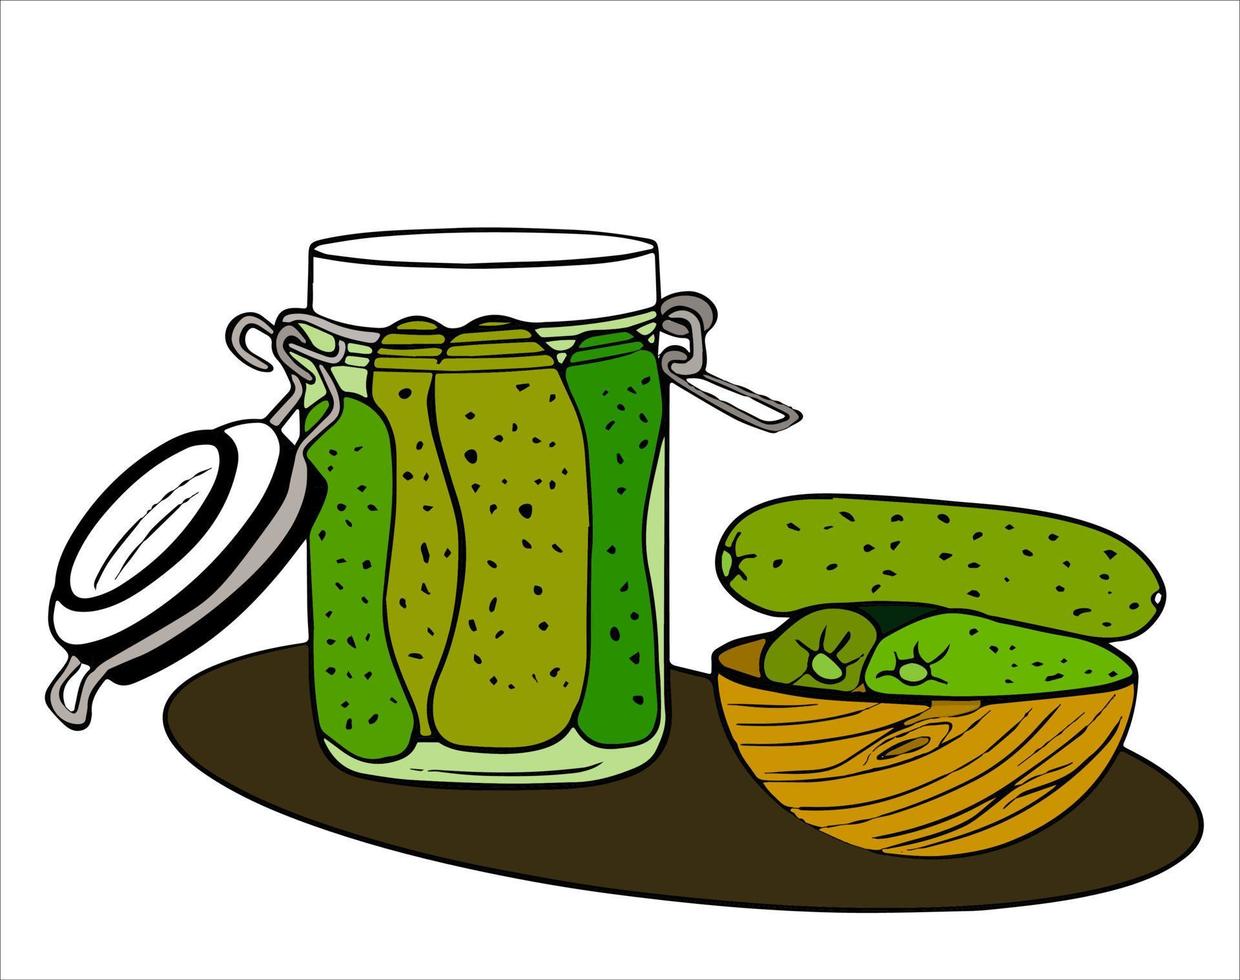 Bank with canned vegetables. Jars with pickled cucumbers. Food containers. Home canned food. Pickles in jar, pickled cucumbers. home production. Fermented vegetables, crispy gherkins with salt. vector